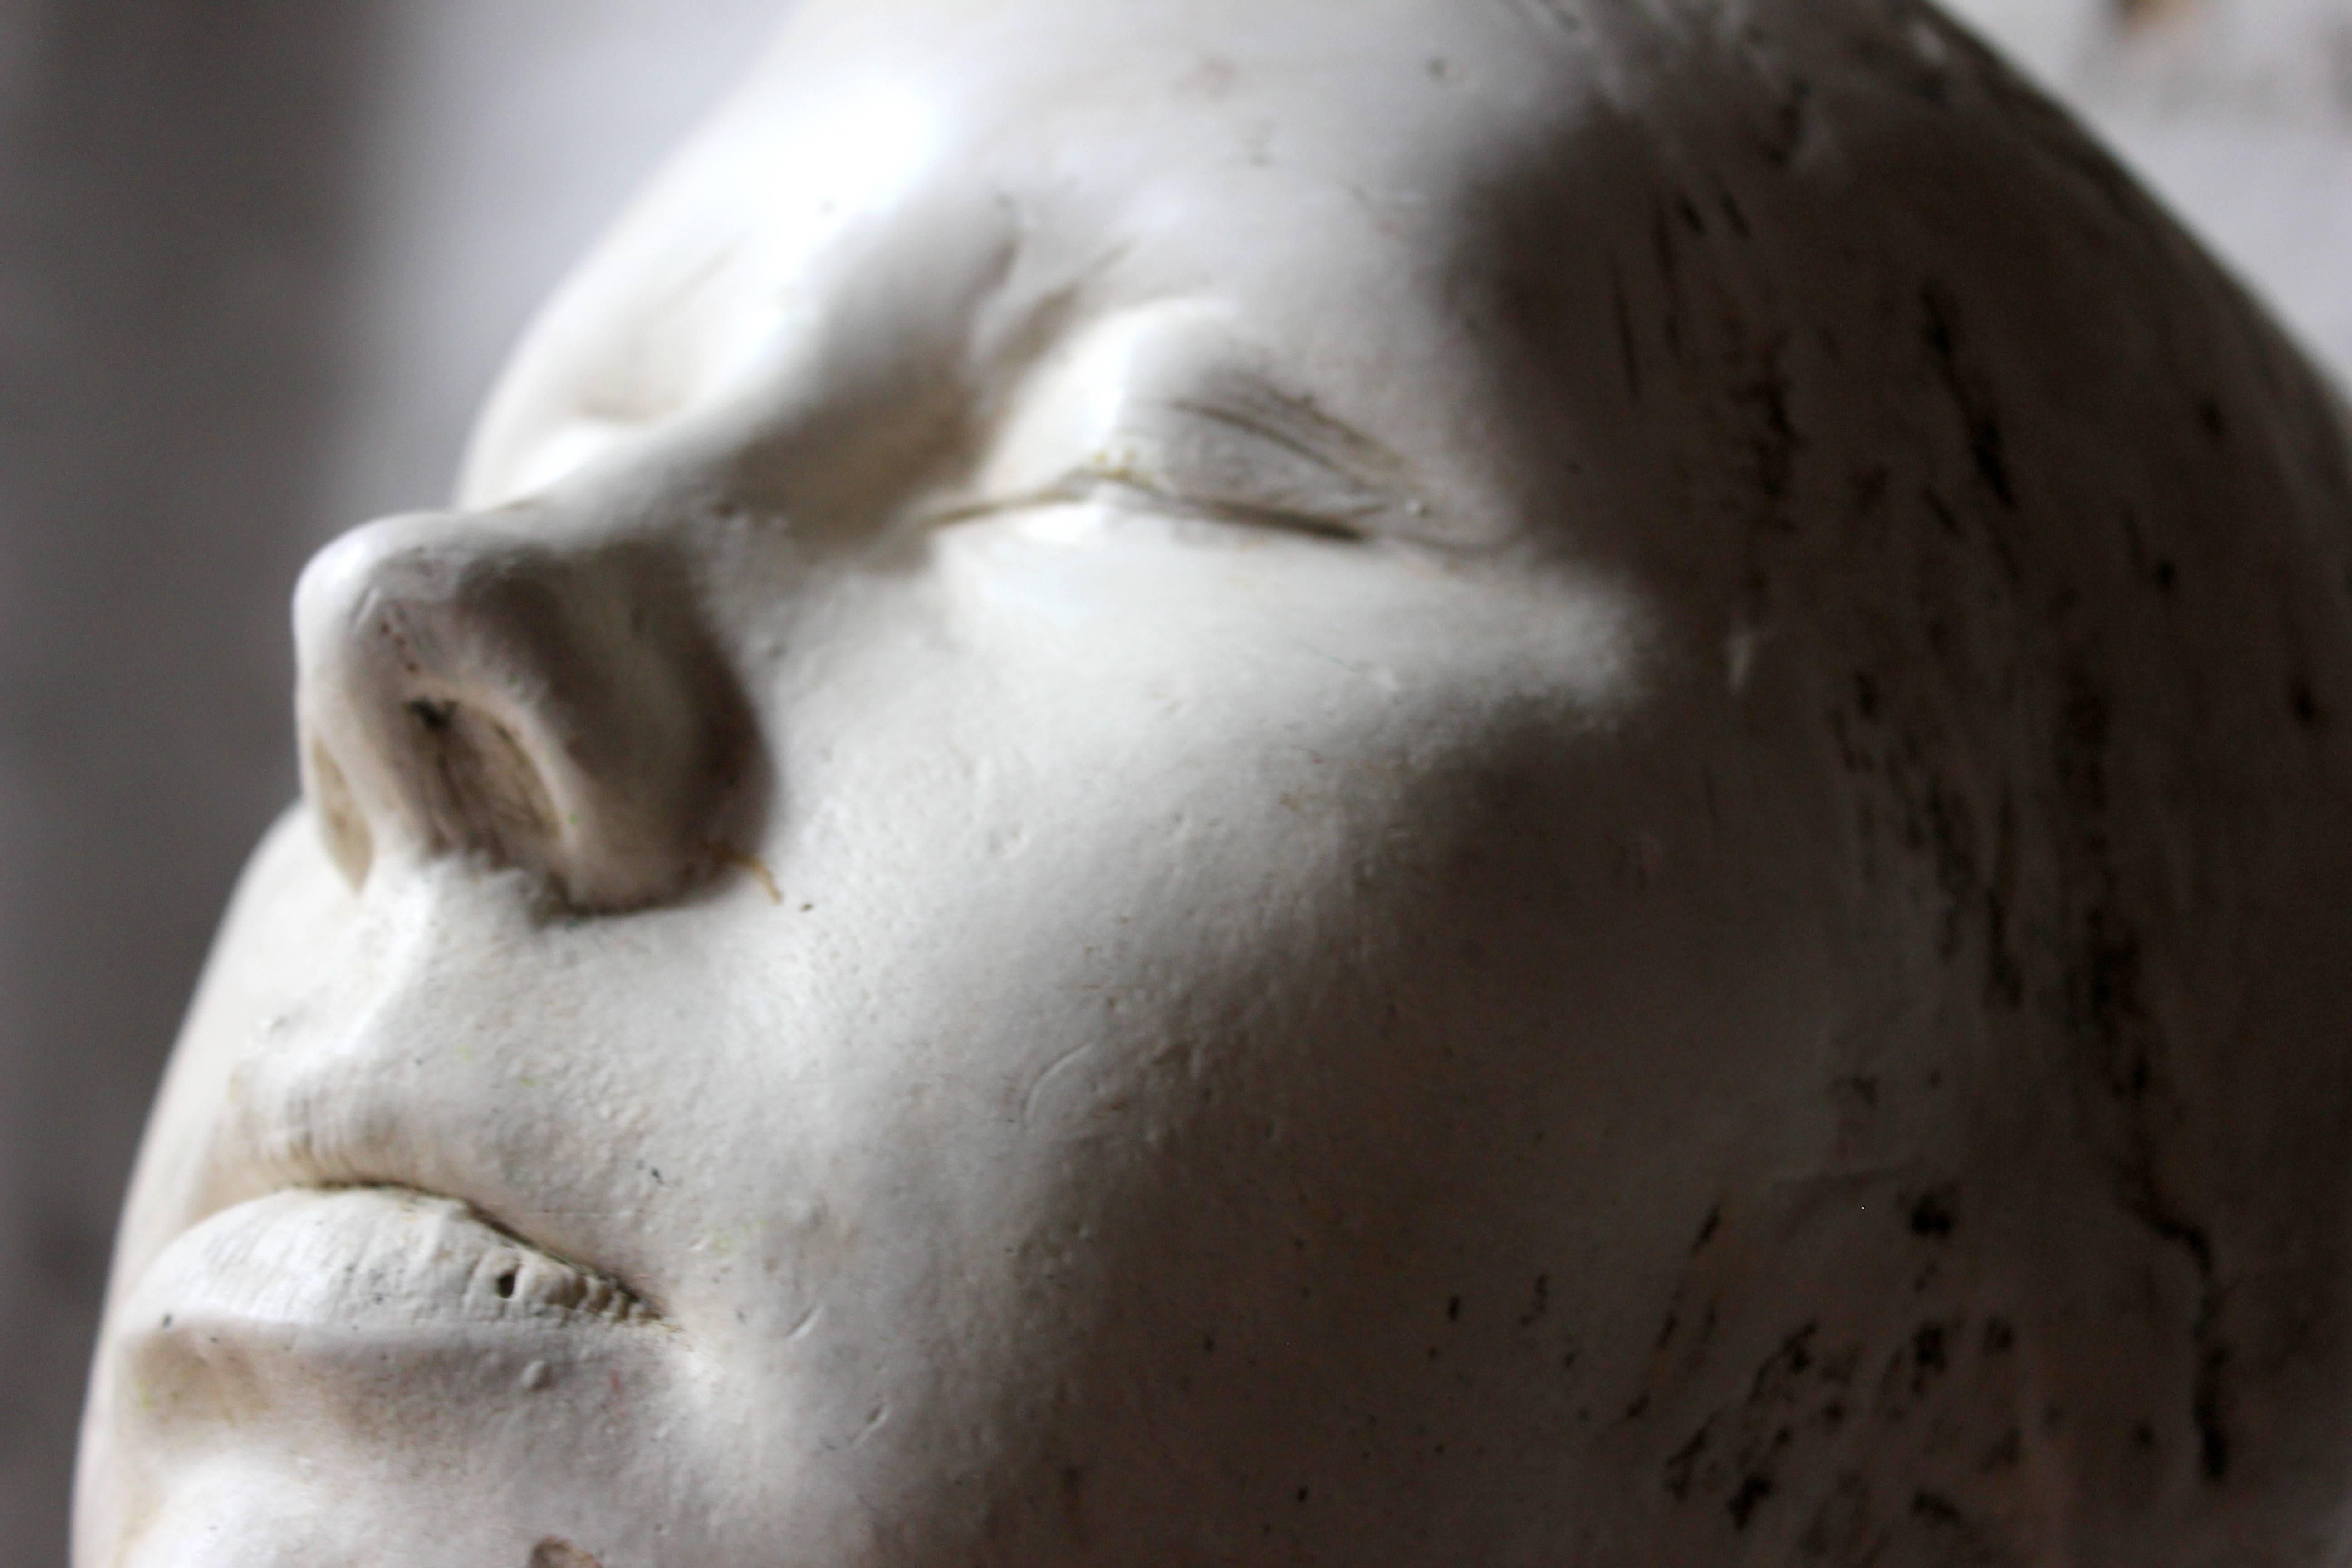 Cast Very Good 20th Century Plaster Death Mask of a Female